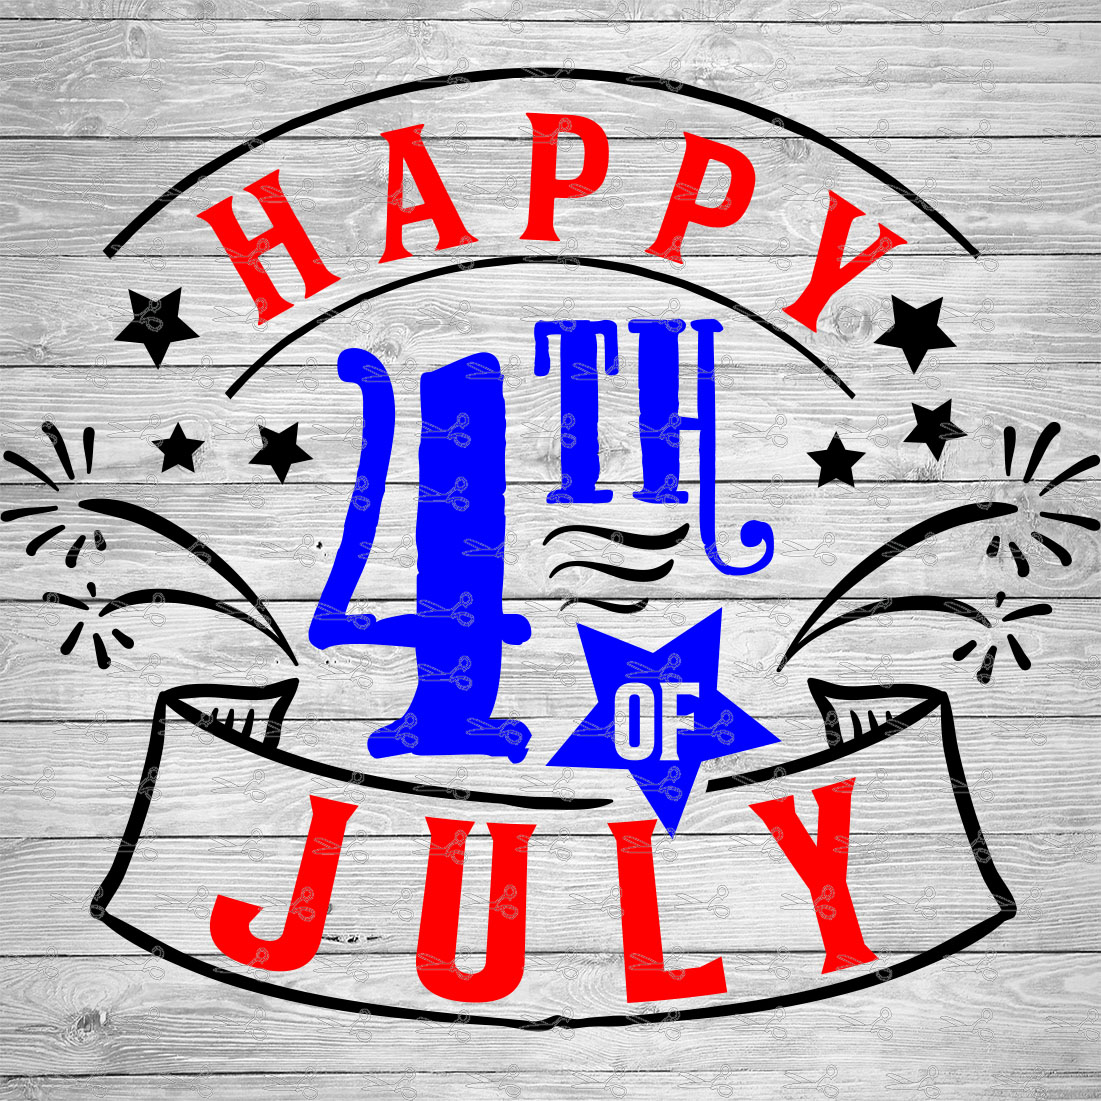 Happy 4th of July SVG,EPS & PNG Files - Digital Download files for